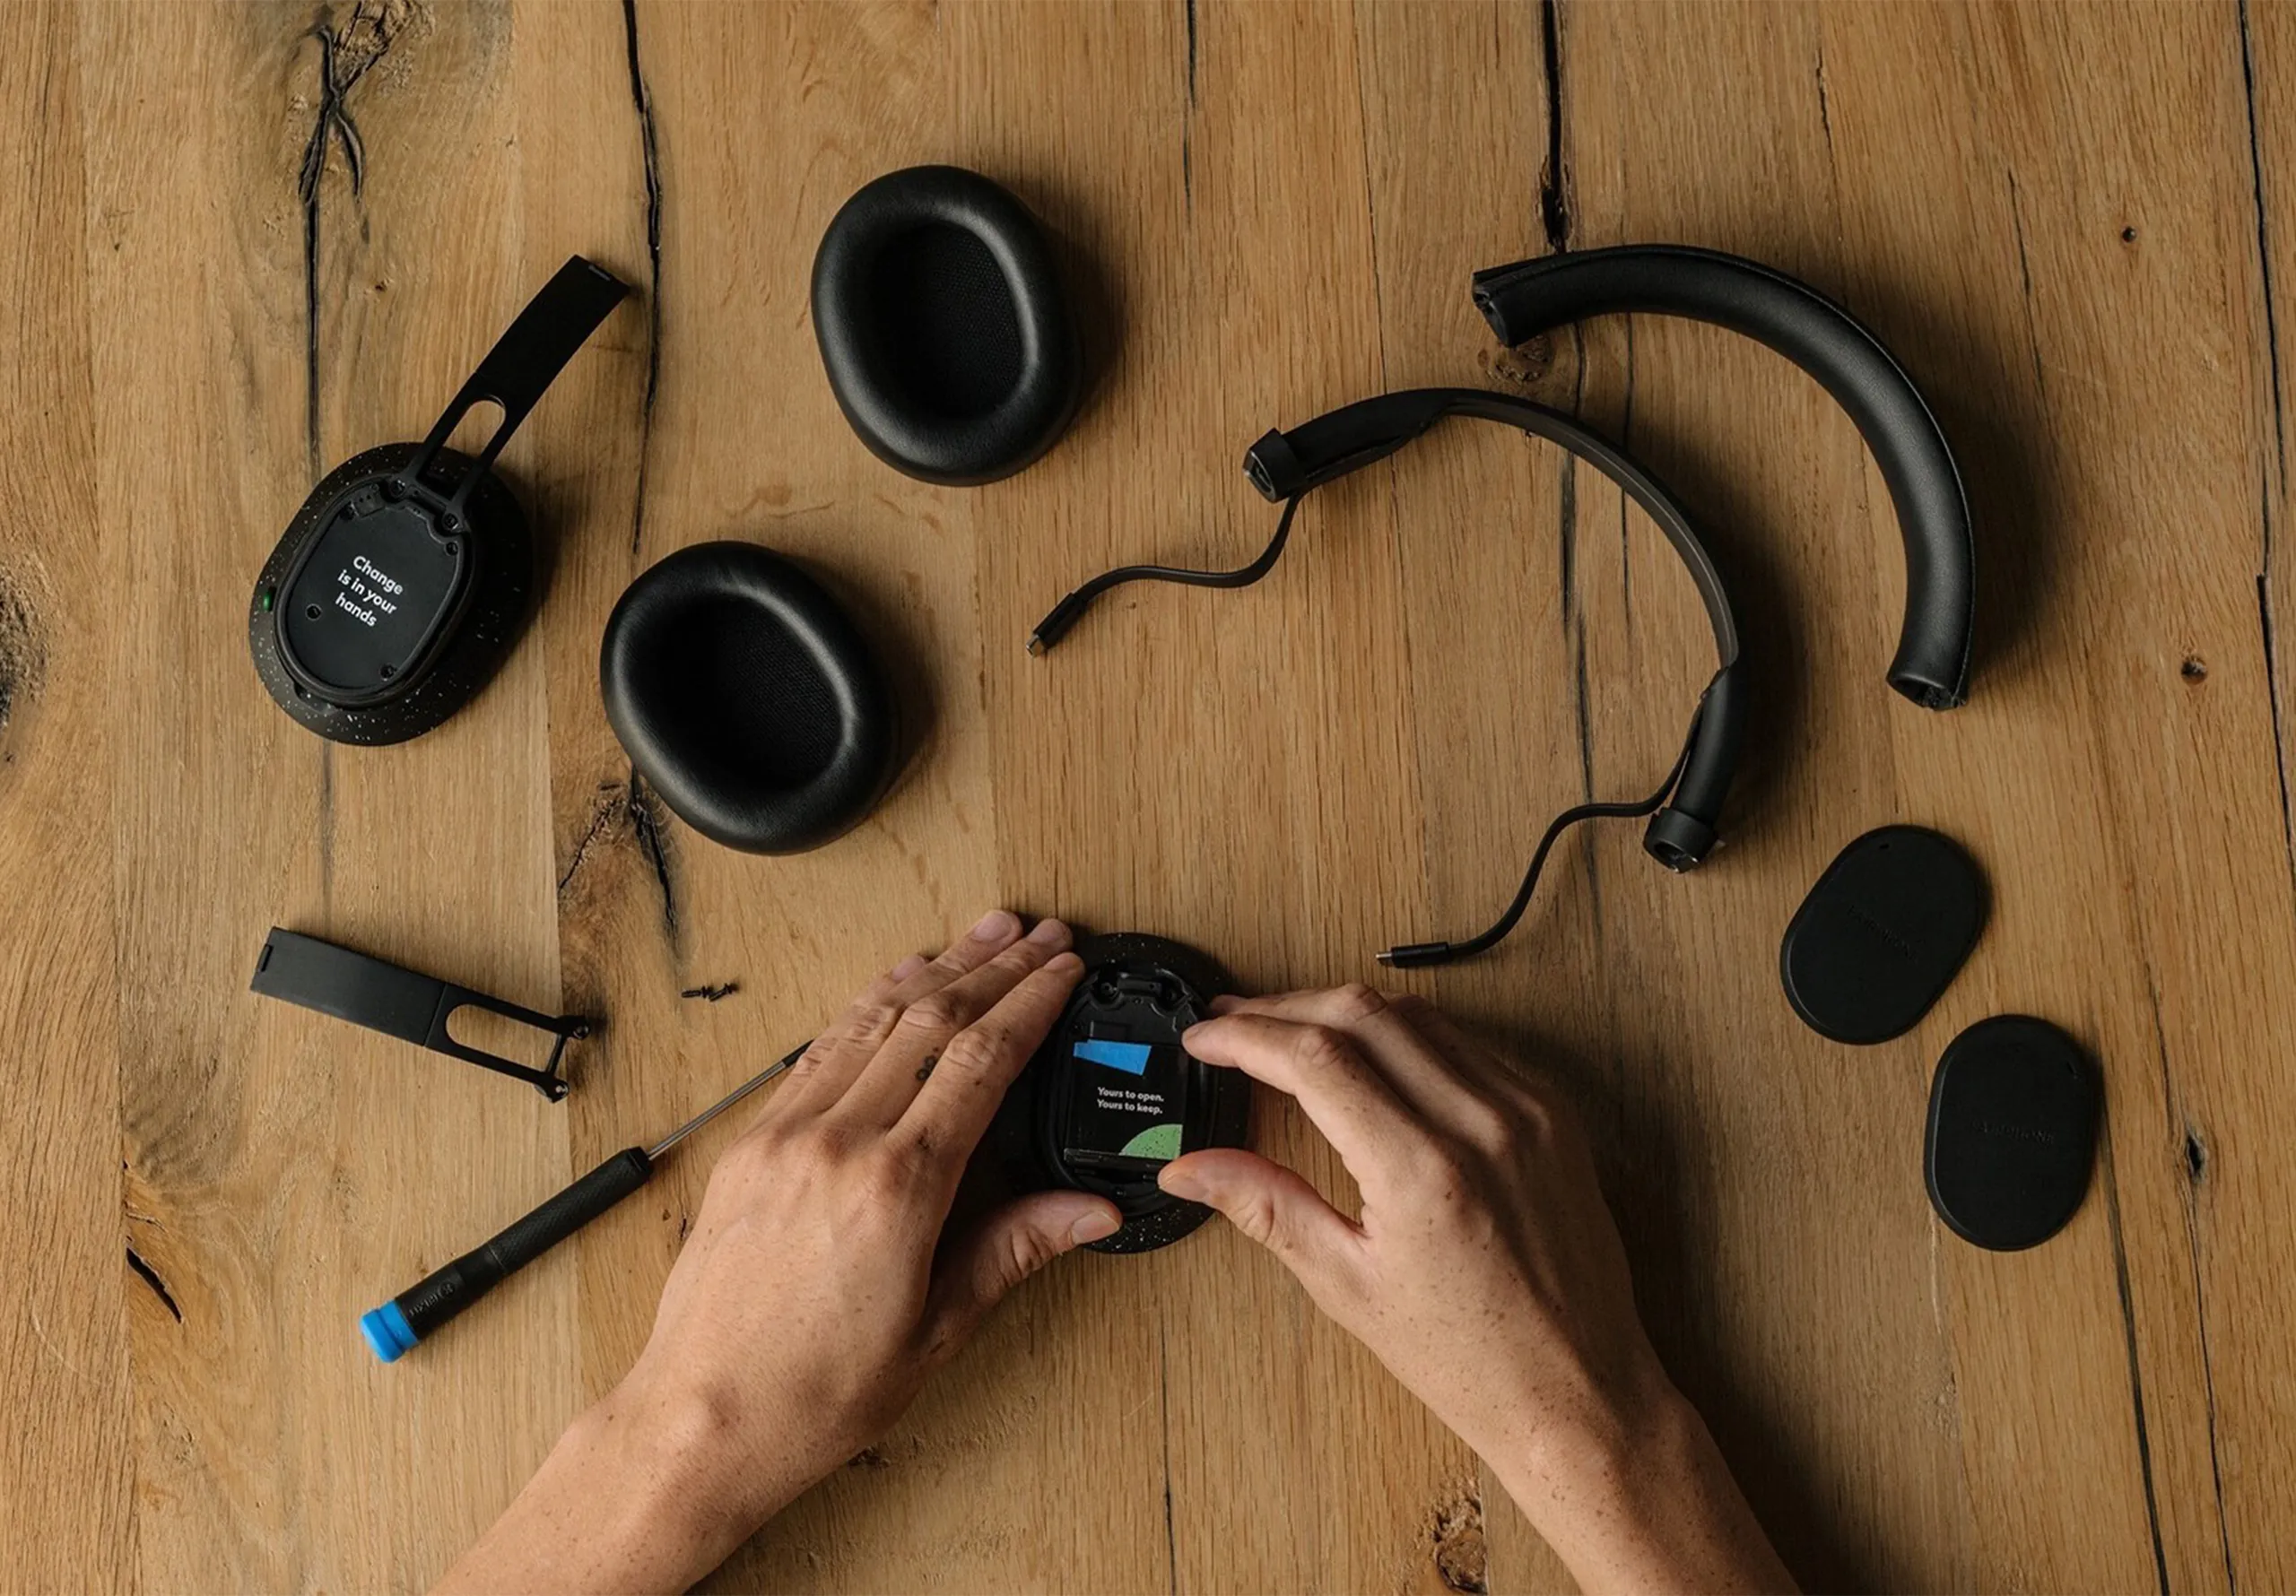 Fairphone modular headphones being repaired by a consumer